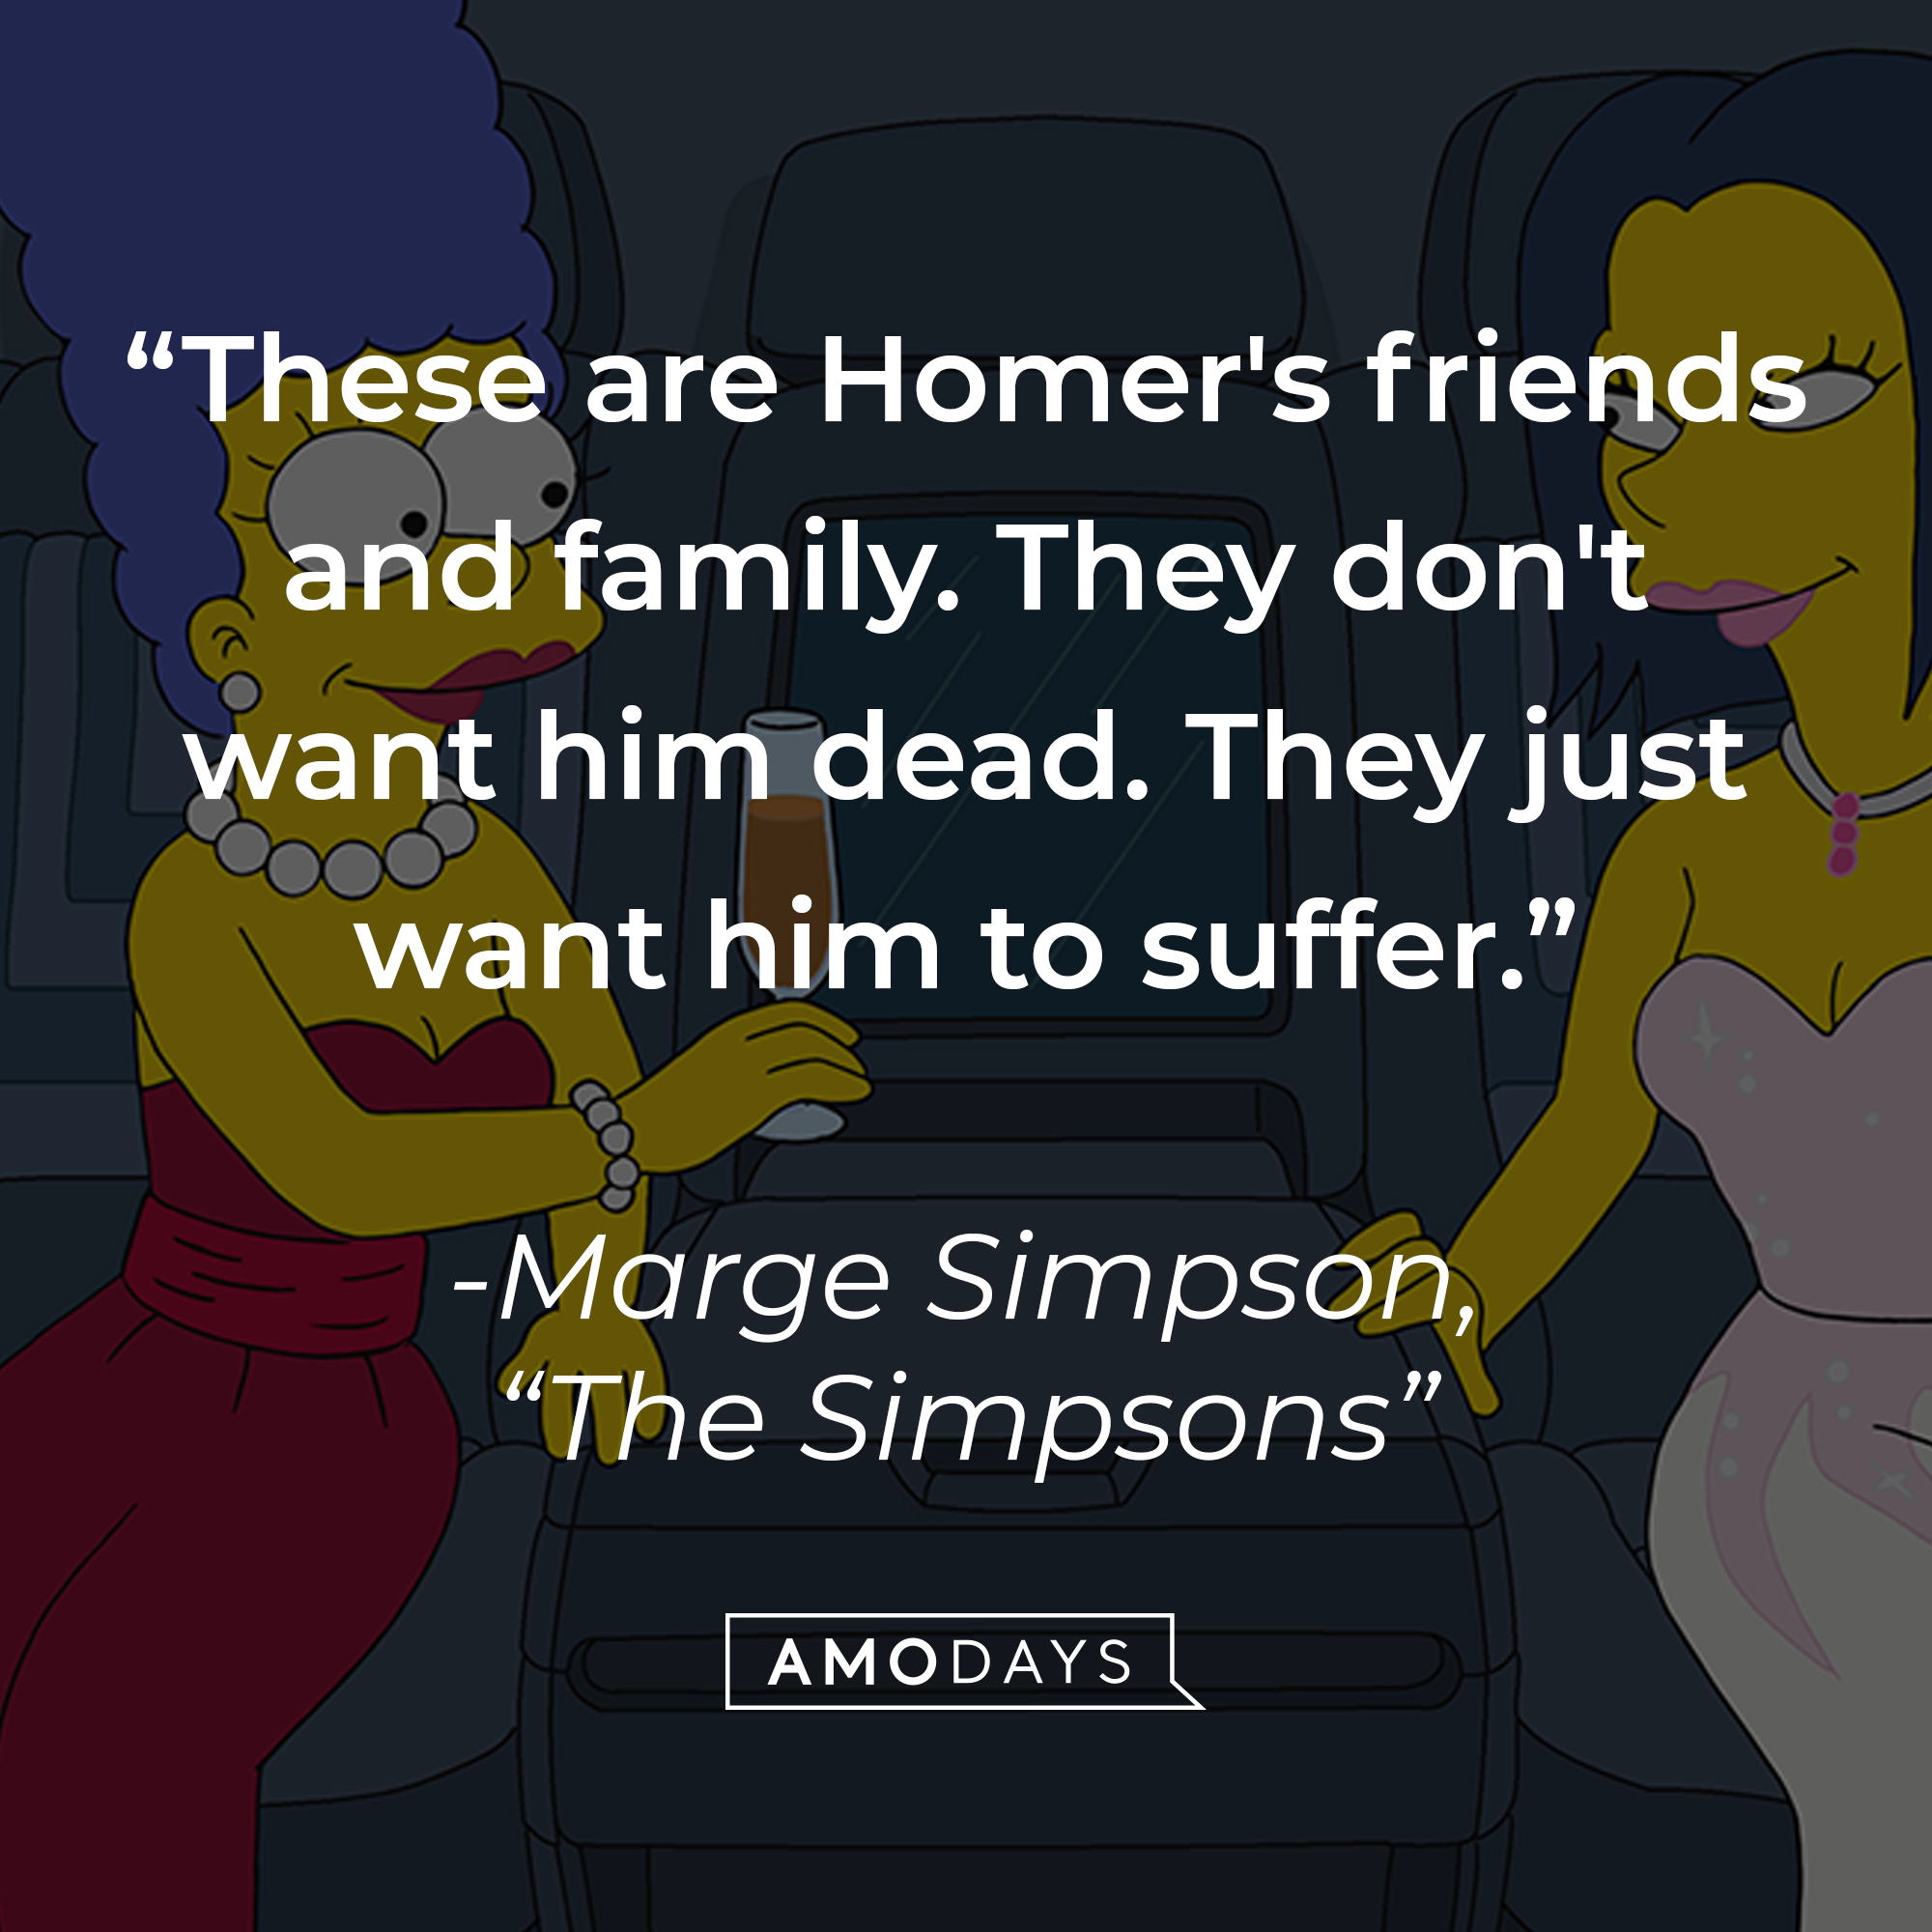 Marge Simpson's quote: "These are Homer's friends and family. They don't want him dead. They just want him to suffer." | Image: facebook.com/TheSimpsons